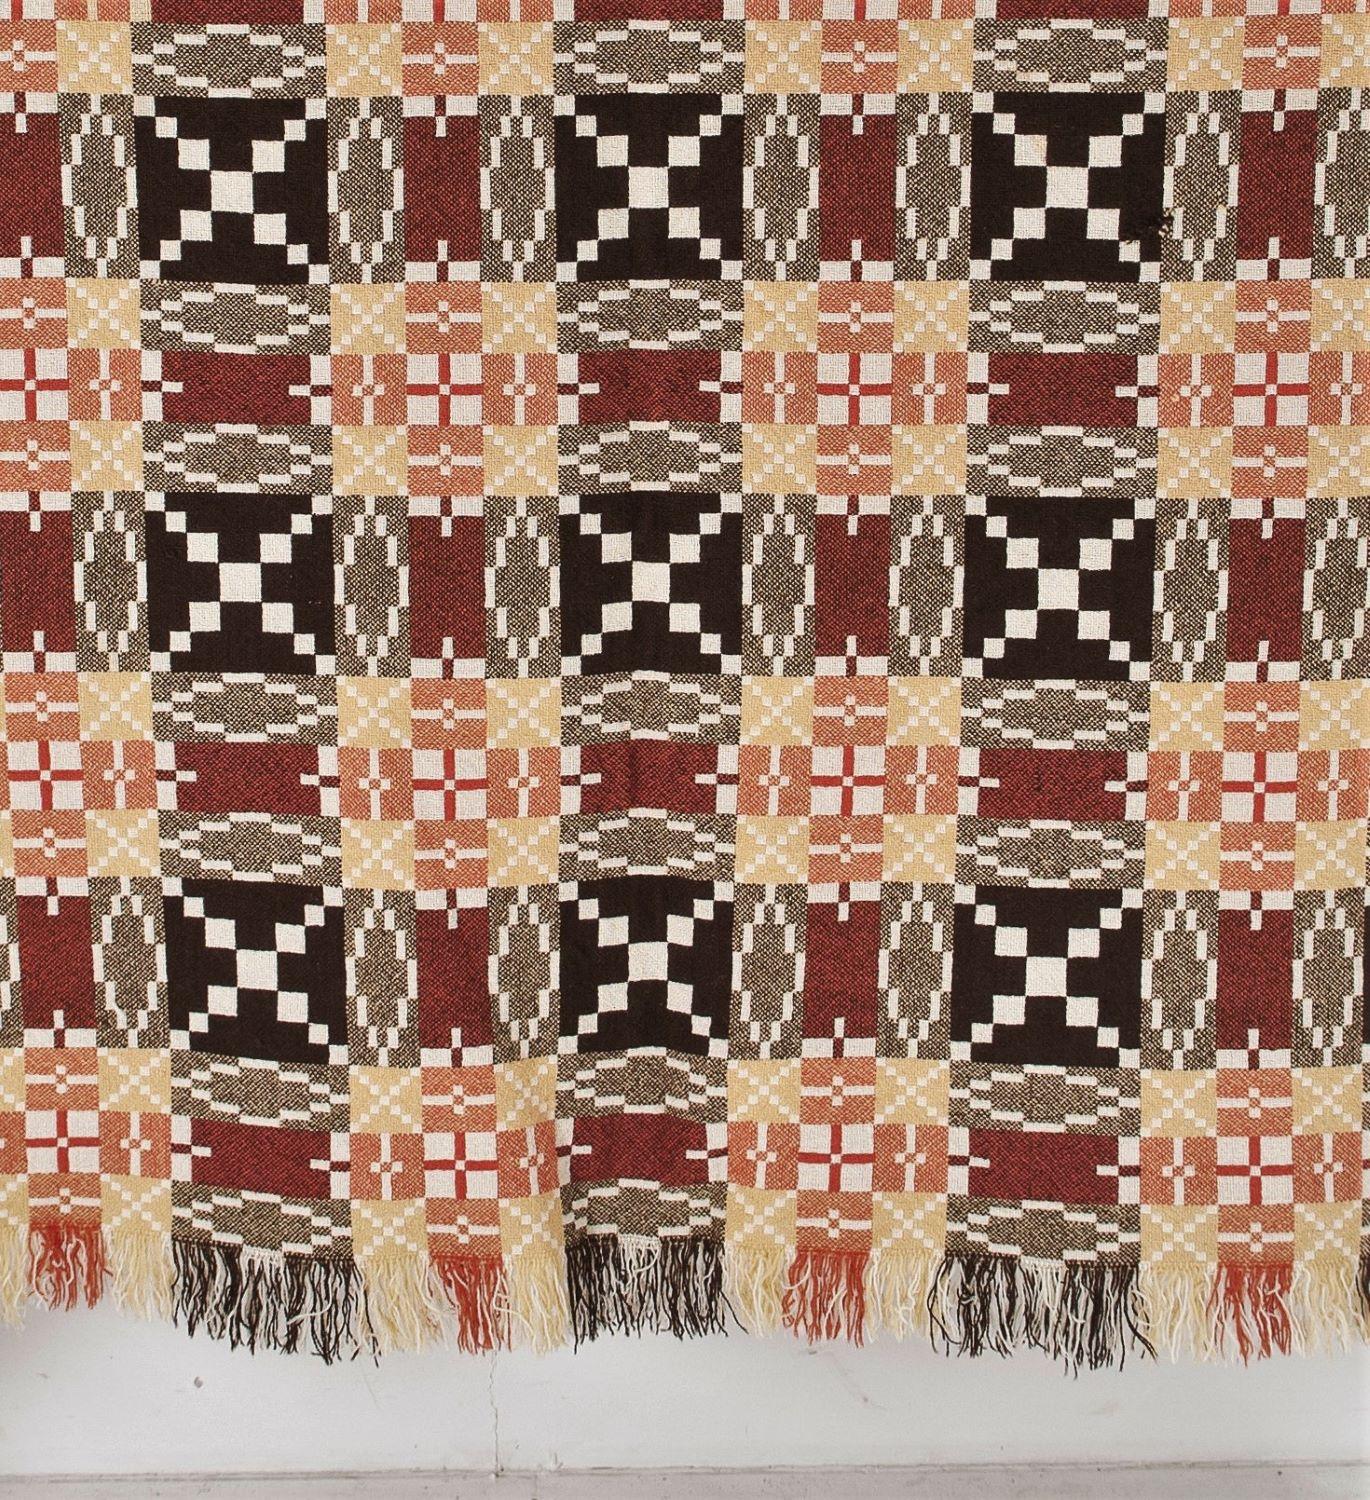 1960s Pure Welsh Wool Tapestry Blanket in an Autumnal Red Brown Colourway 4